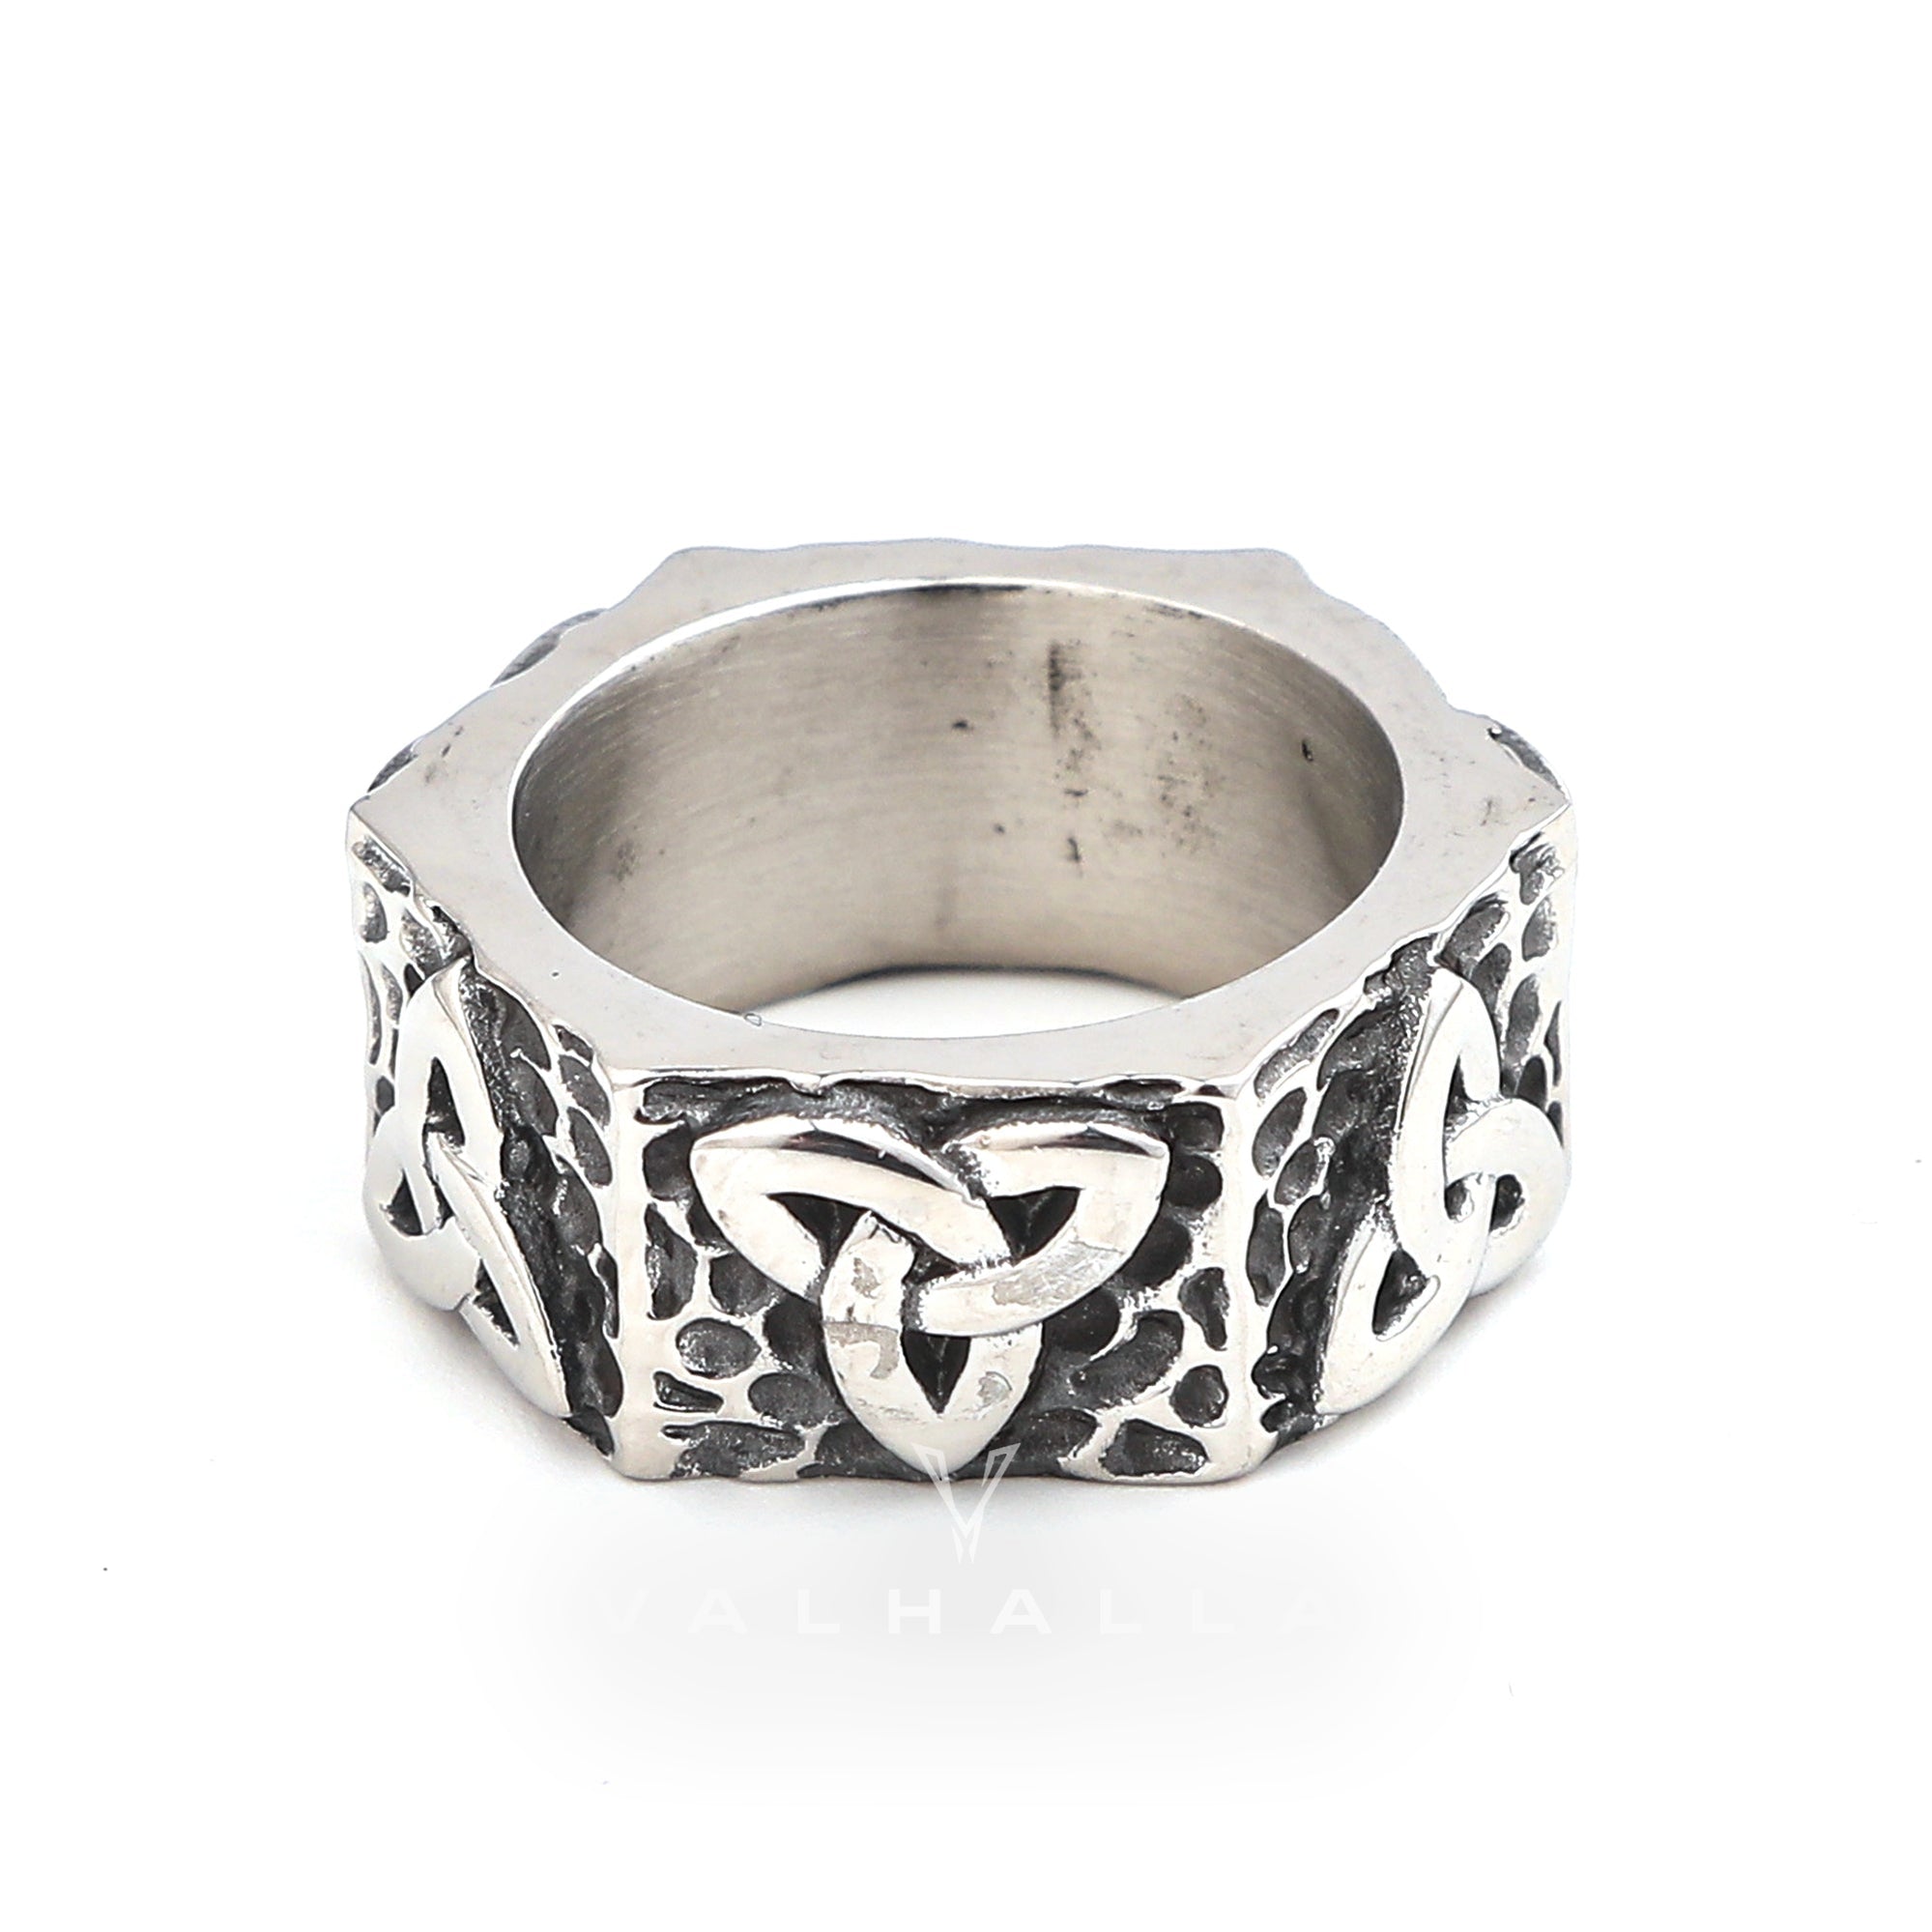 Hexagonal Handcrafted Stainless Steel Triquetra Ring